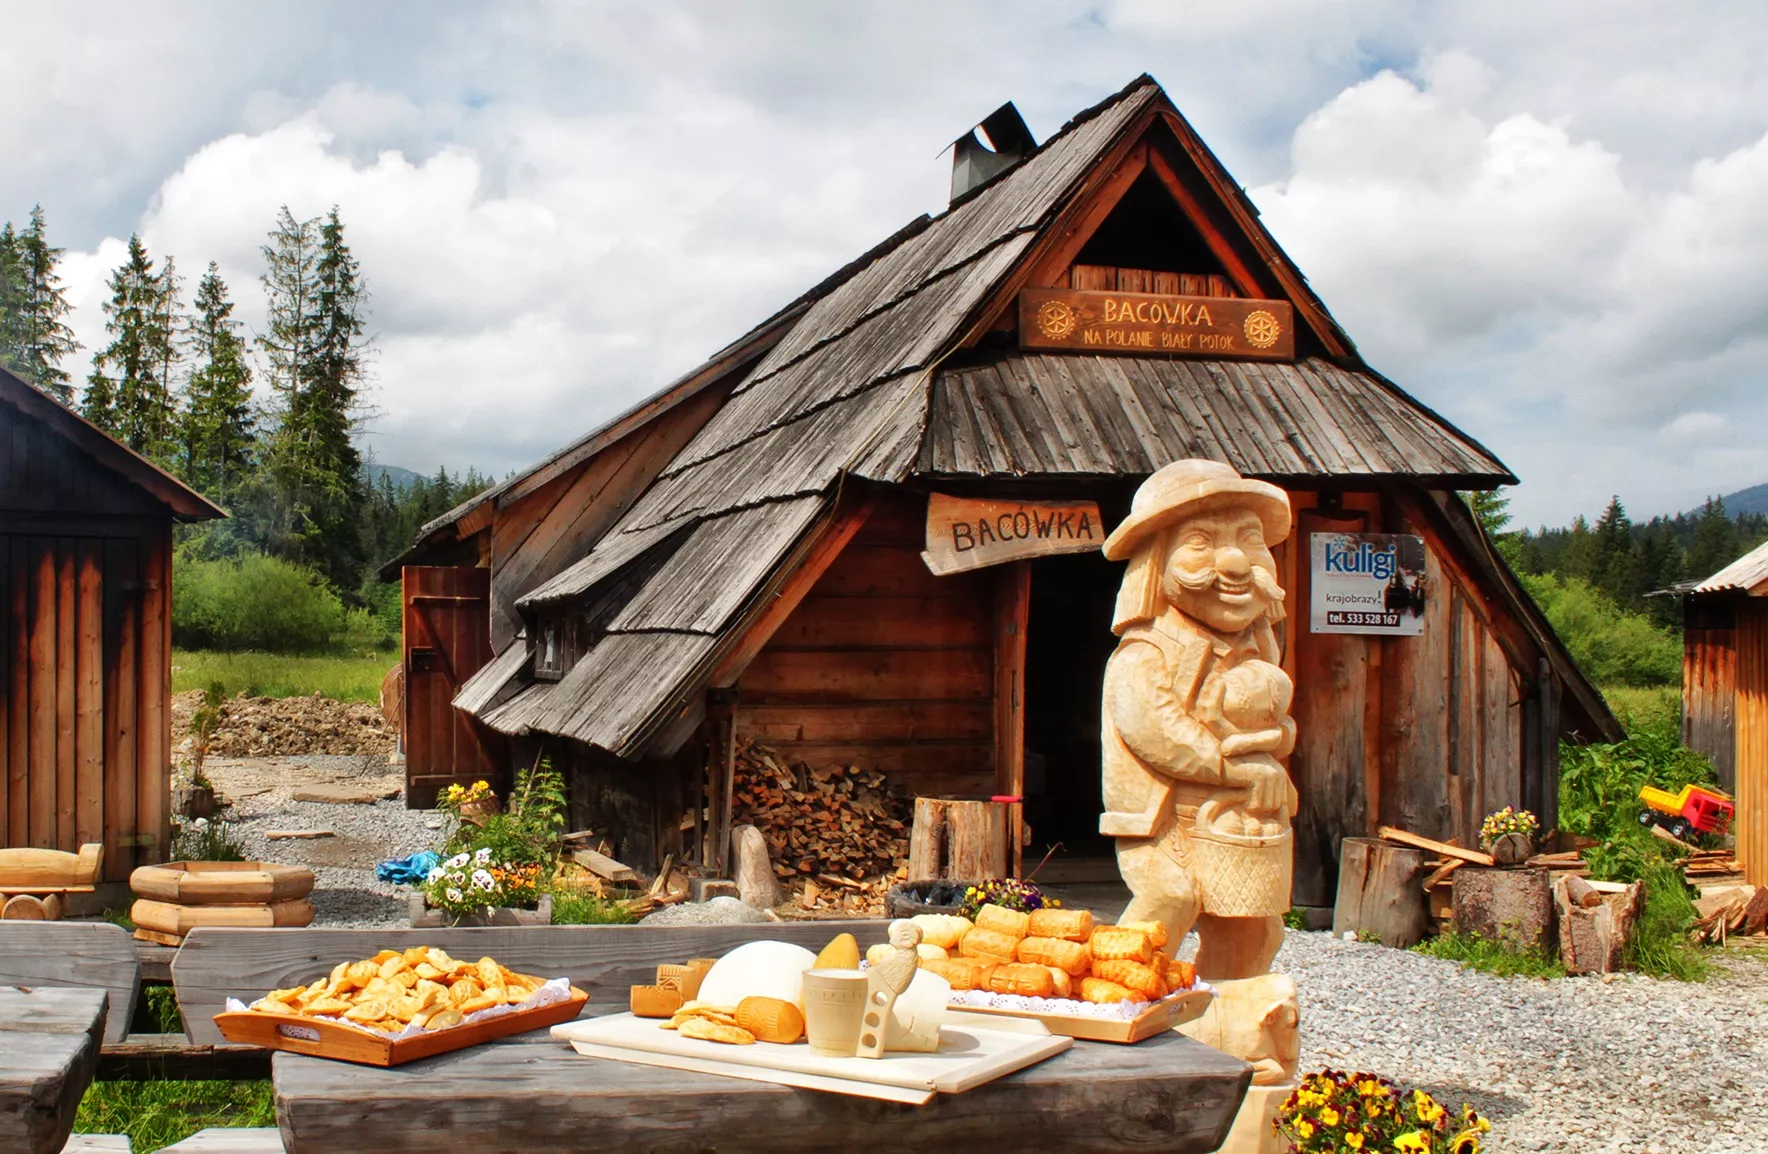 Shepherd's Hut in the Bialy Potok Clearing in Poland, Europe | Cheesemakers - Rated 5